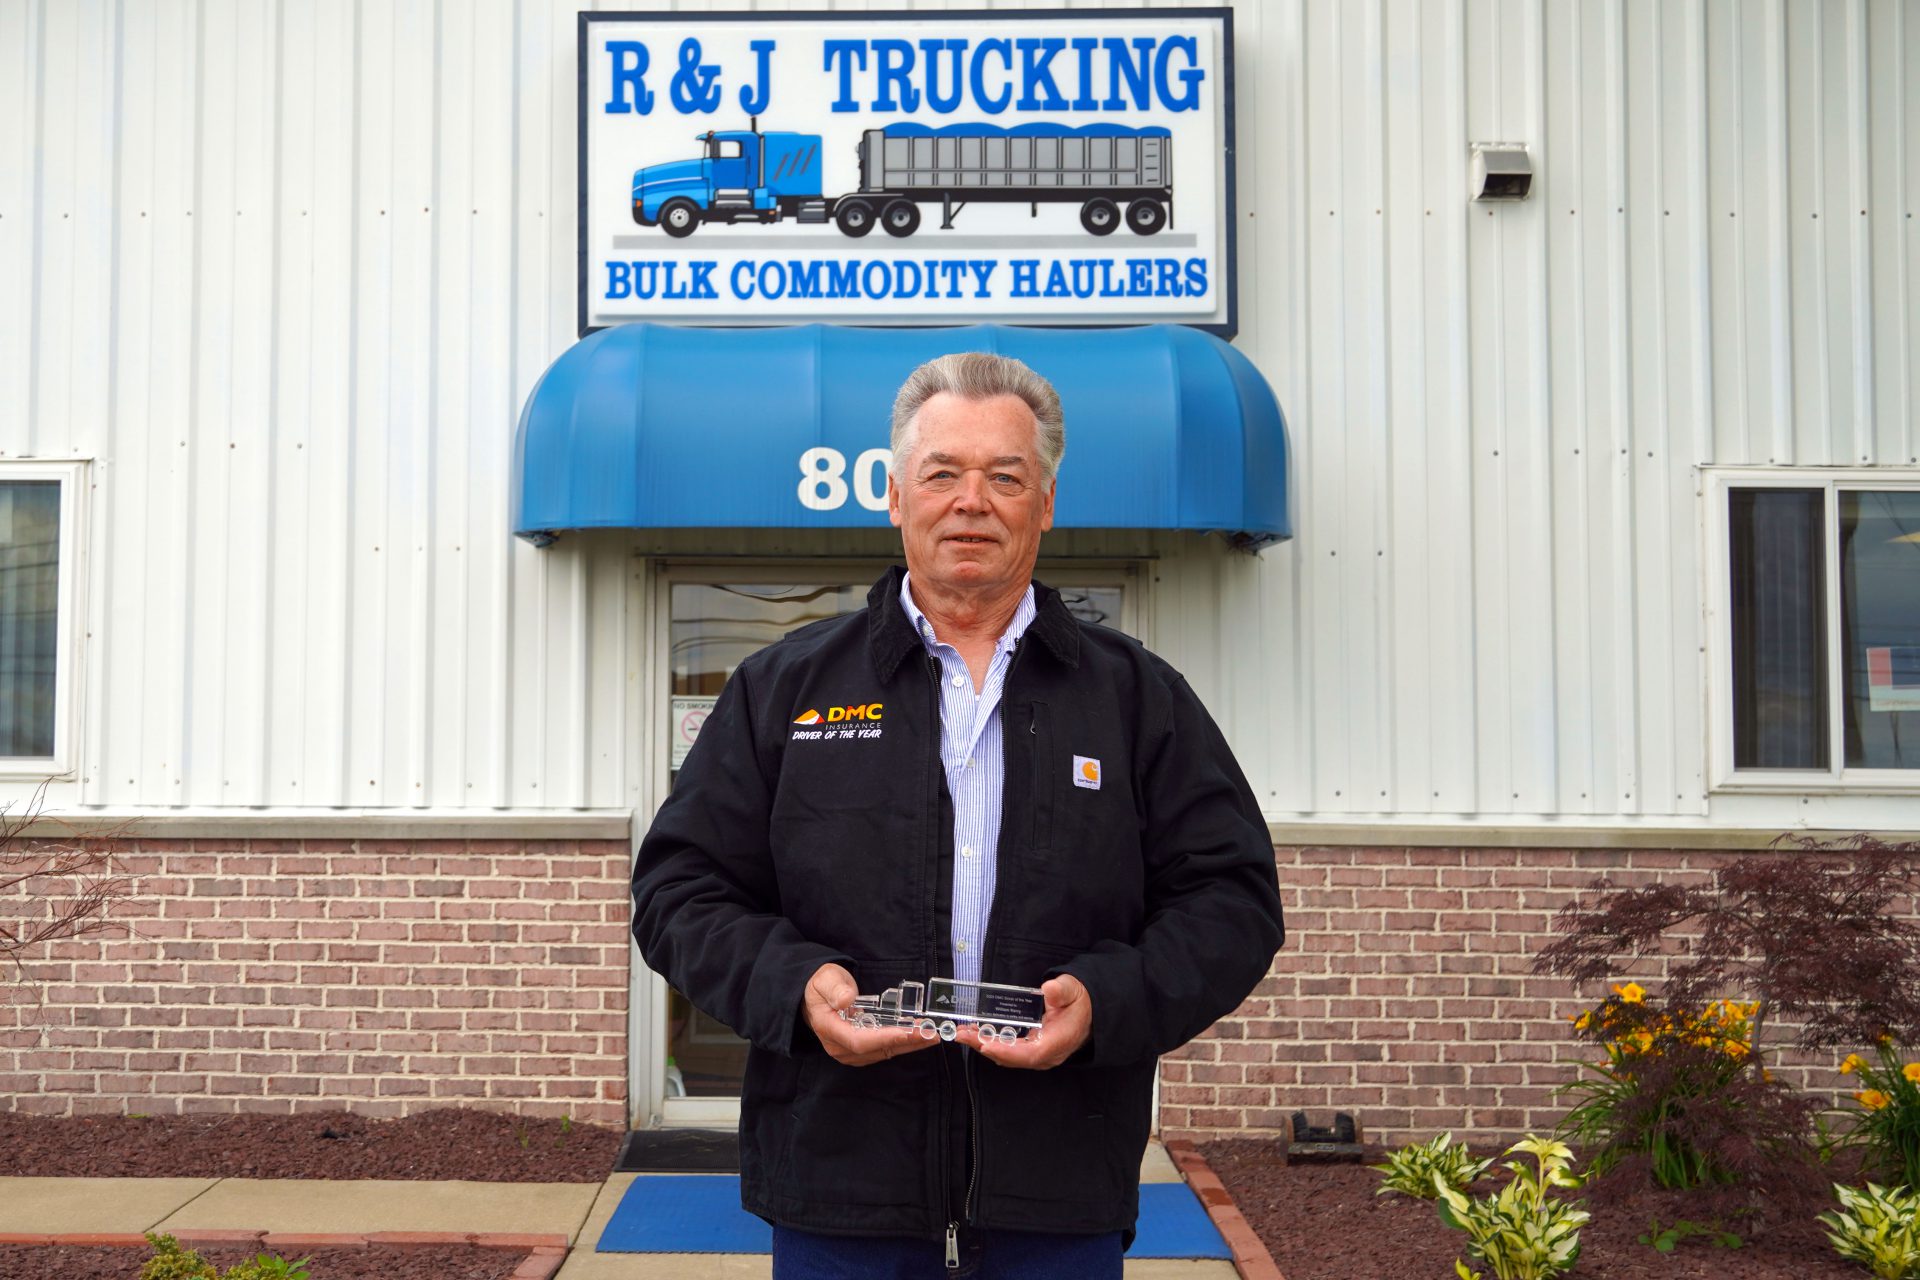 Bill Kerry DMC Driver of the Year